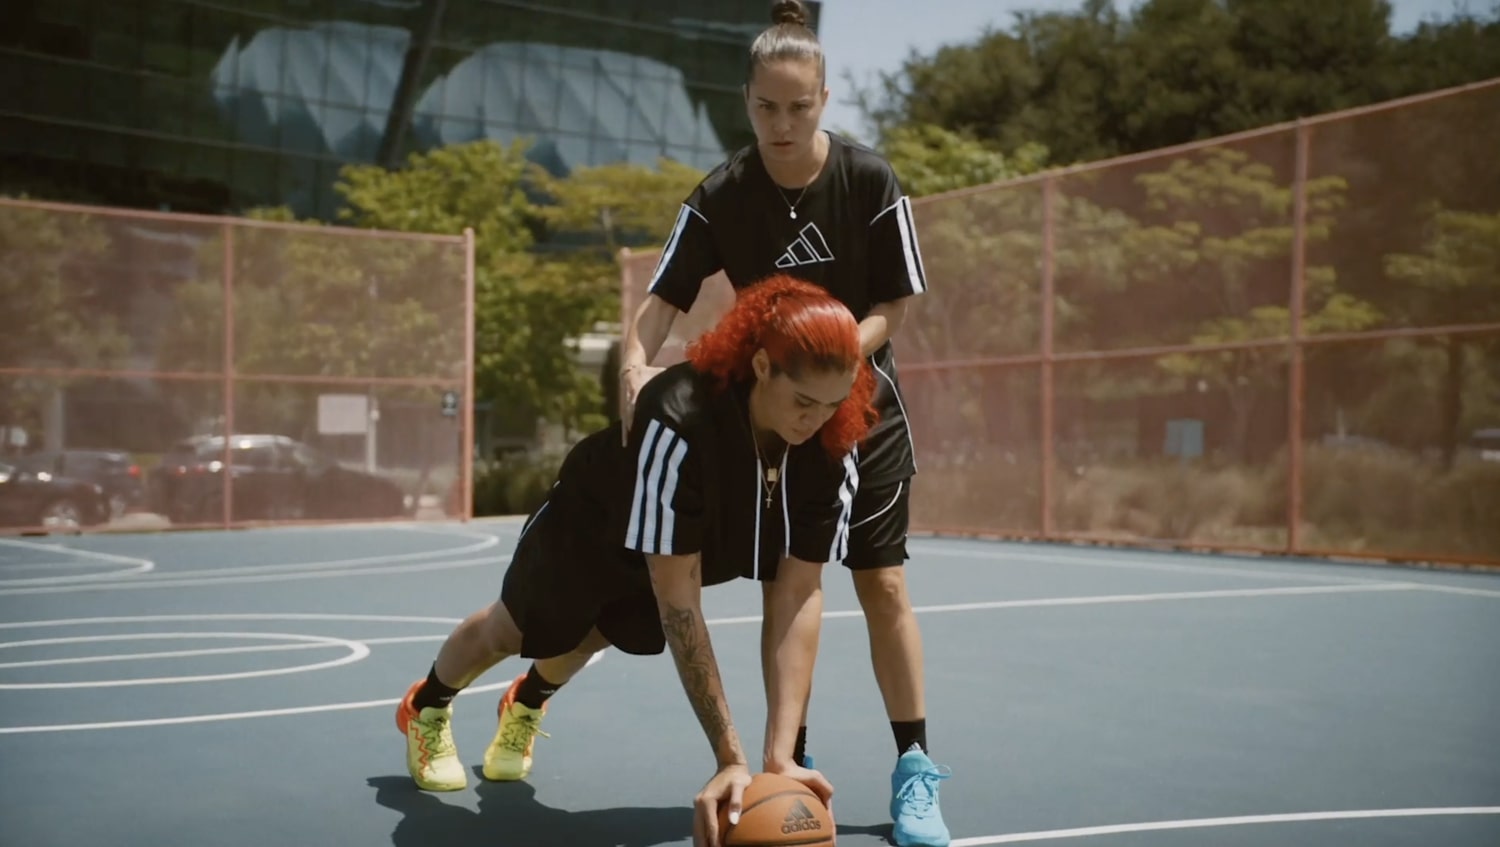 Adidas Training Series, Campaigns of the world